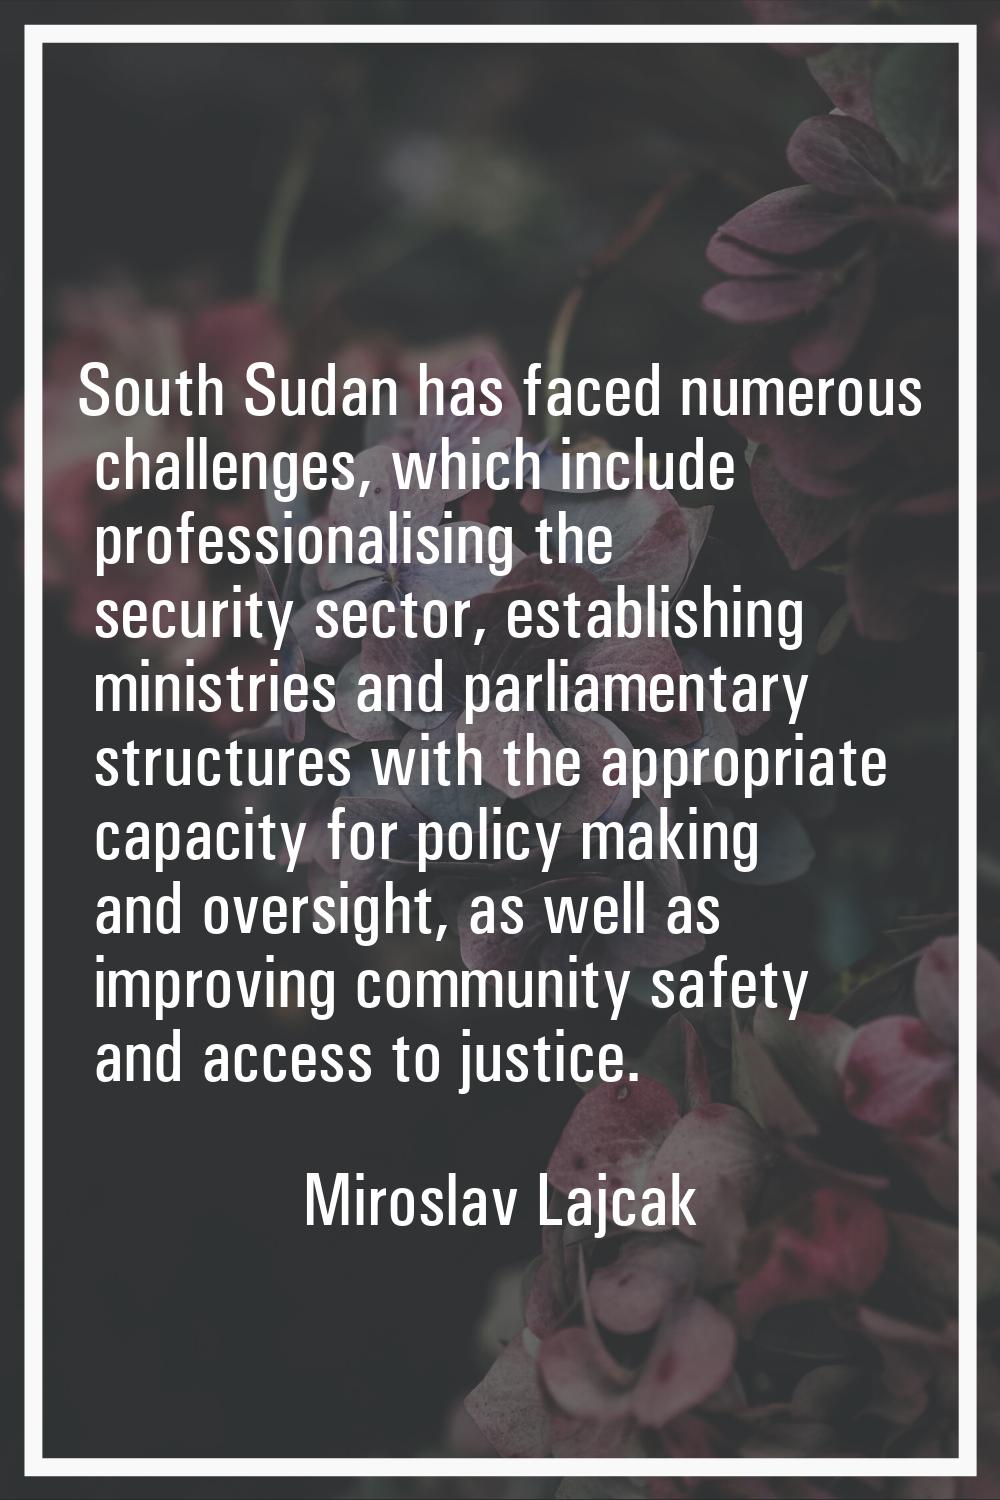 South Sudan has faced numerous challenges, which include professionalising the security sector, est